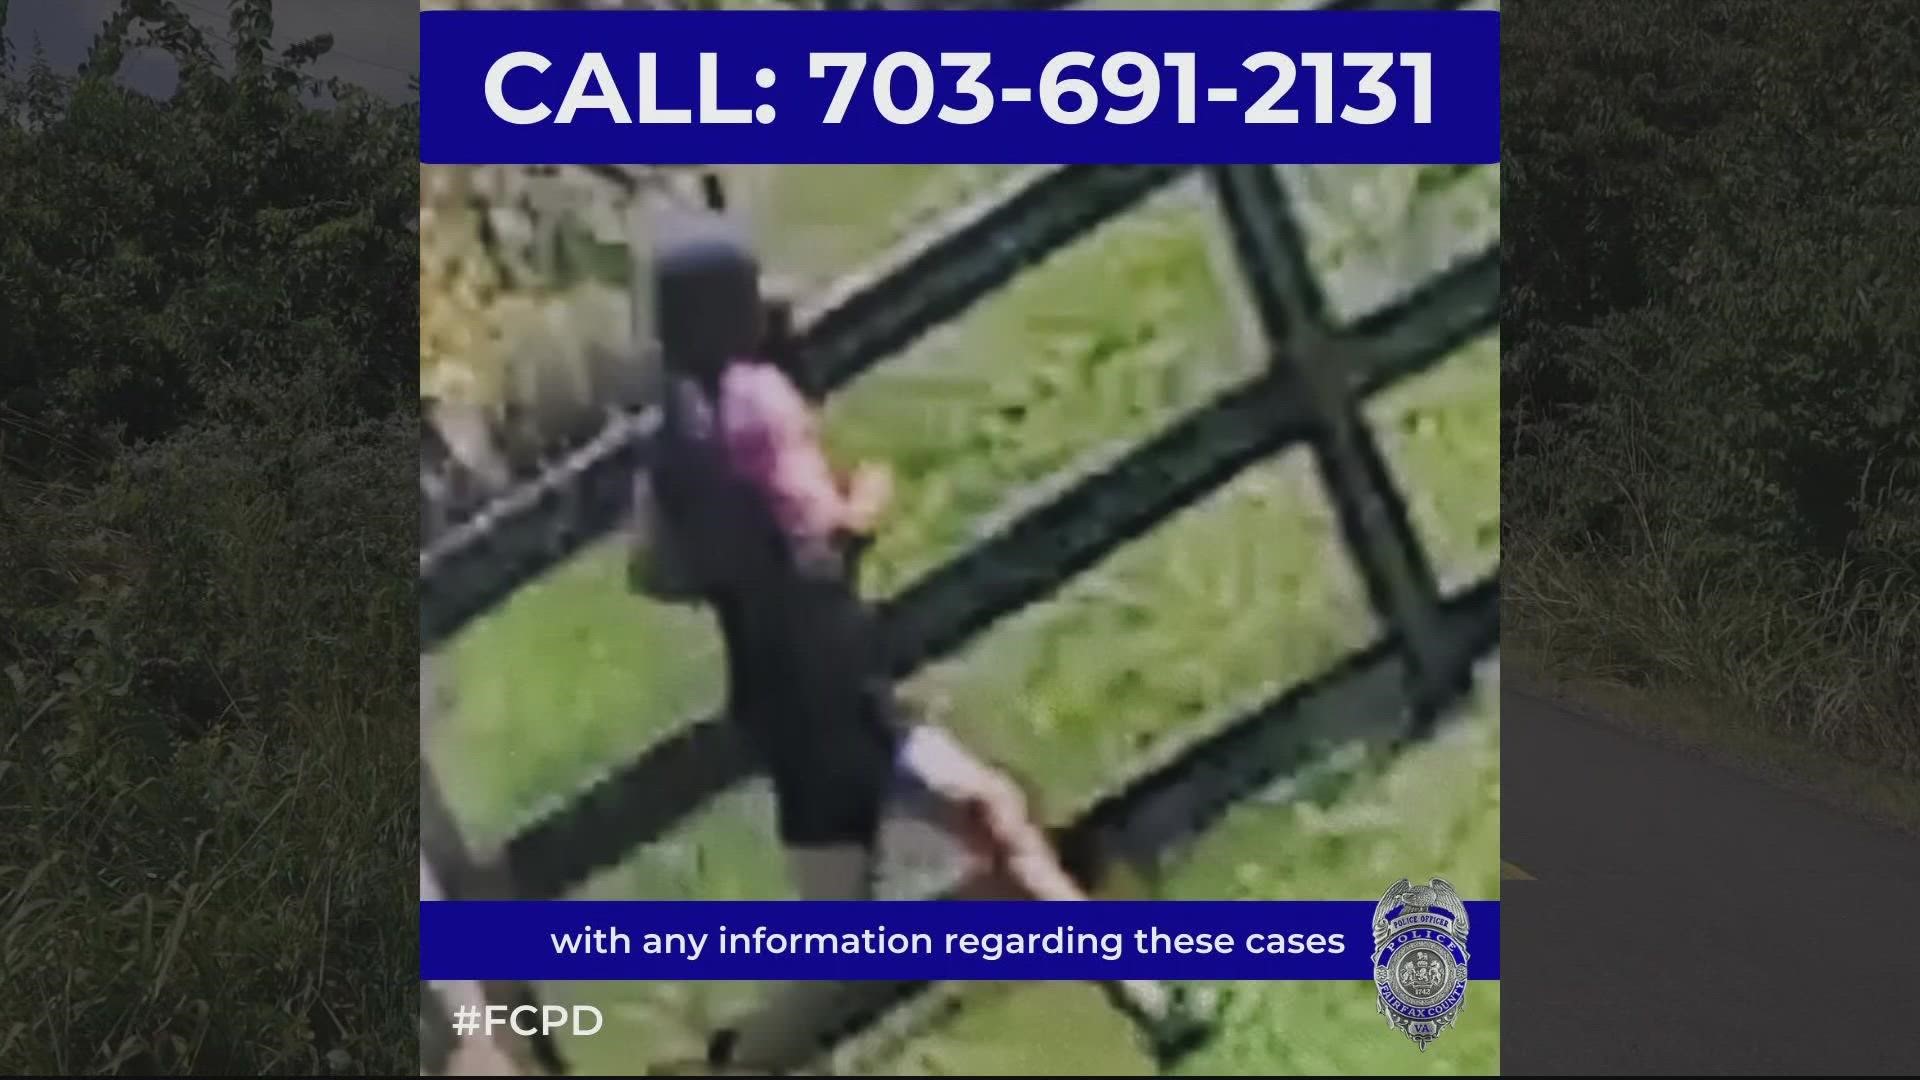 The Fairfax County Police Department has released a photo of the man wanted for a series of indecent exposure and assault incidents that happened on the W&OD Trail